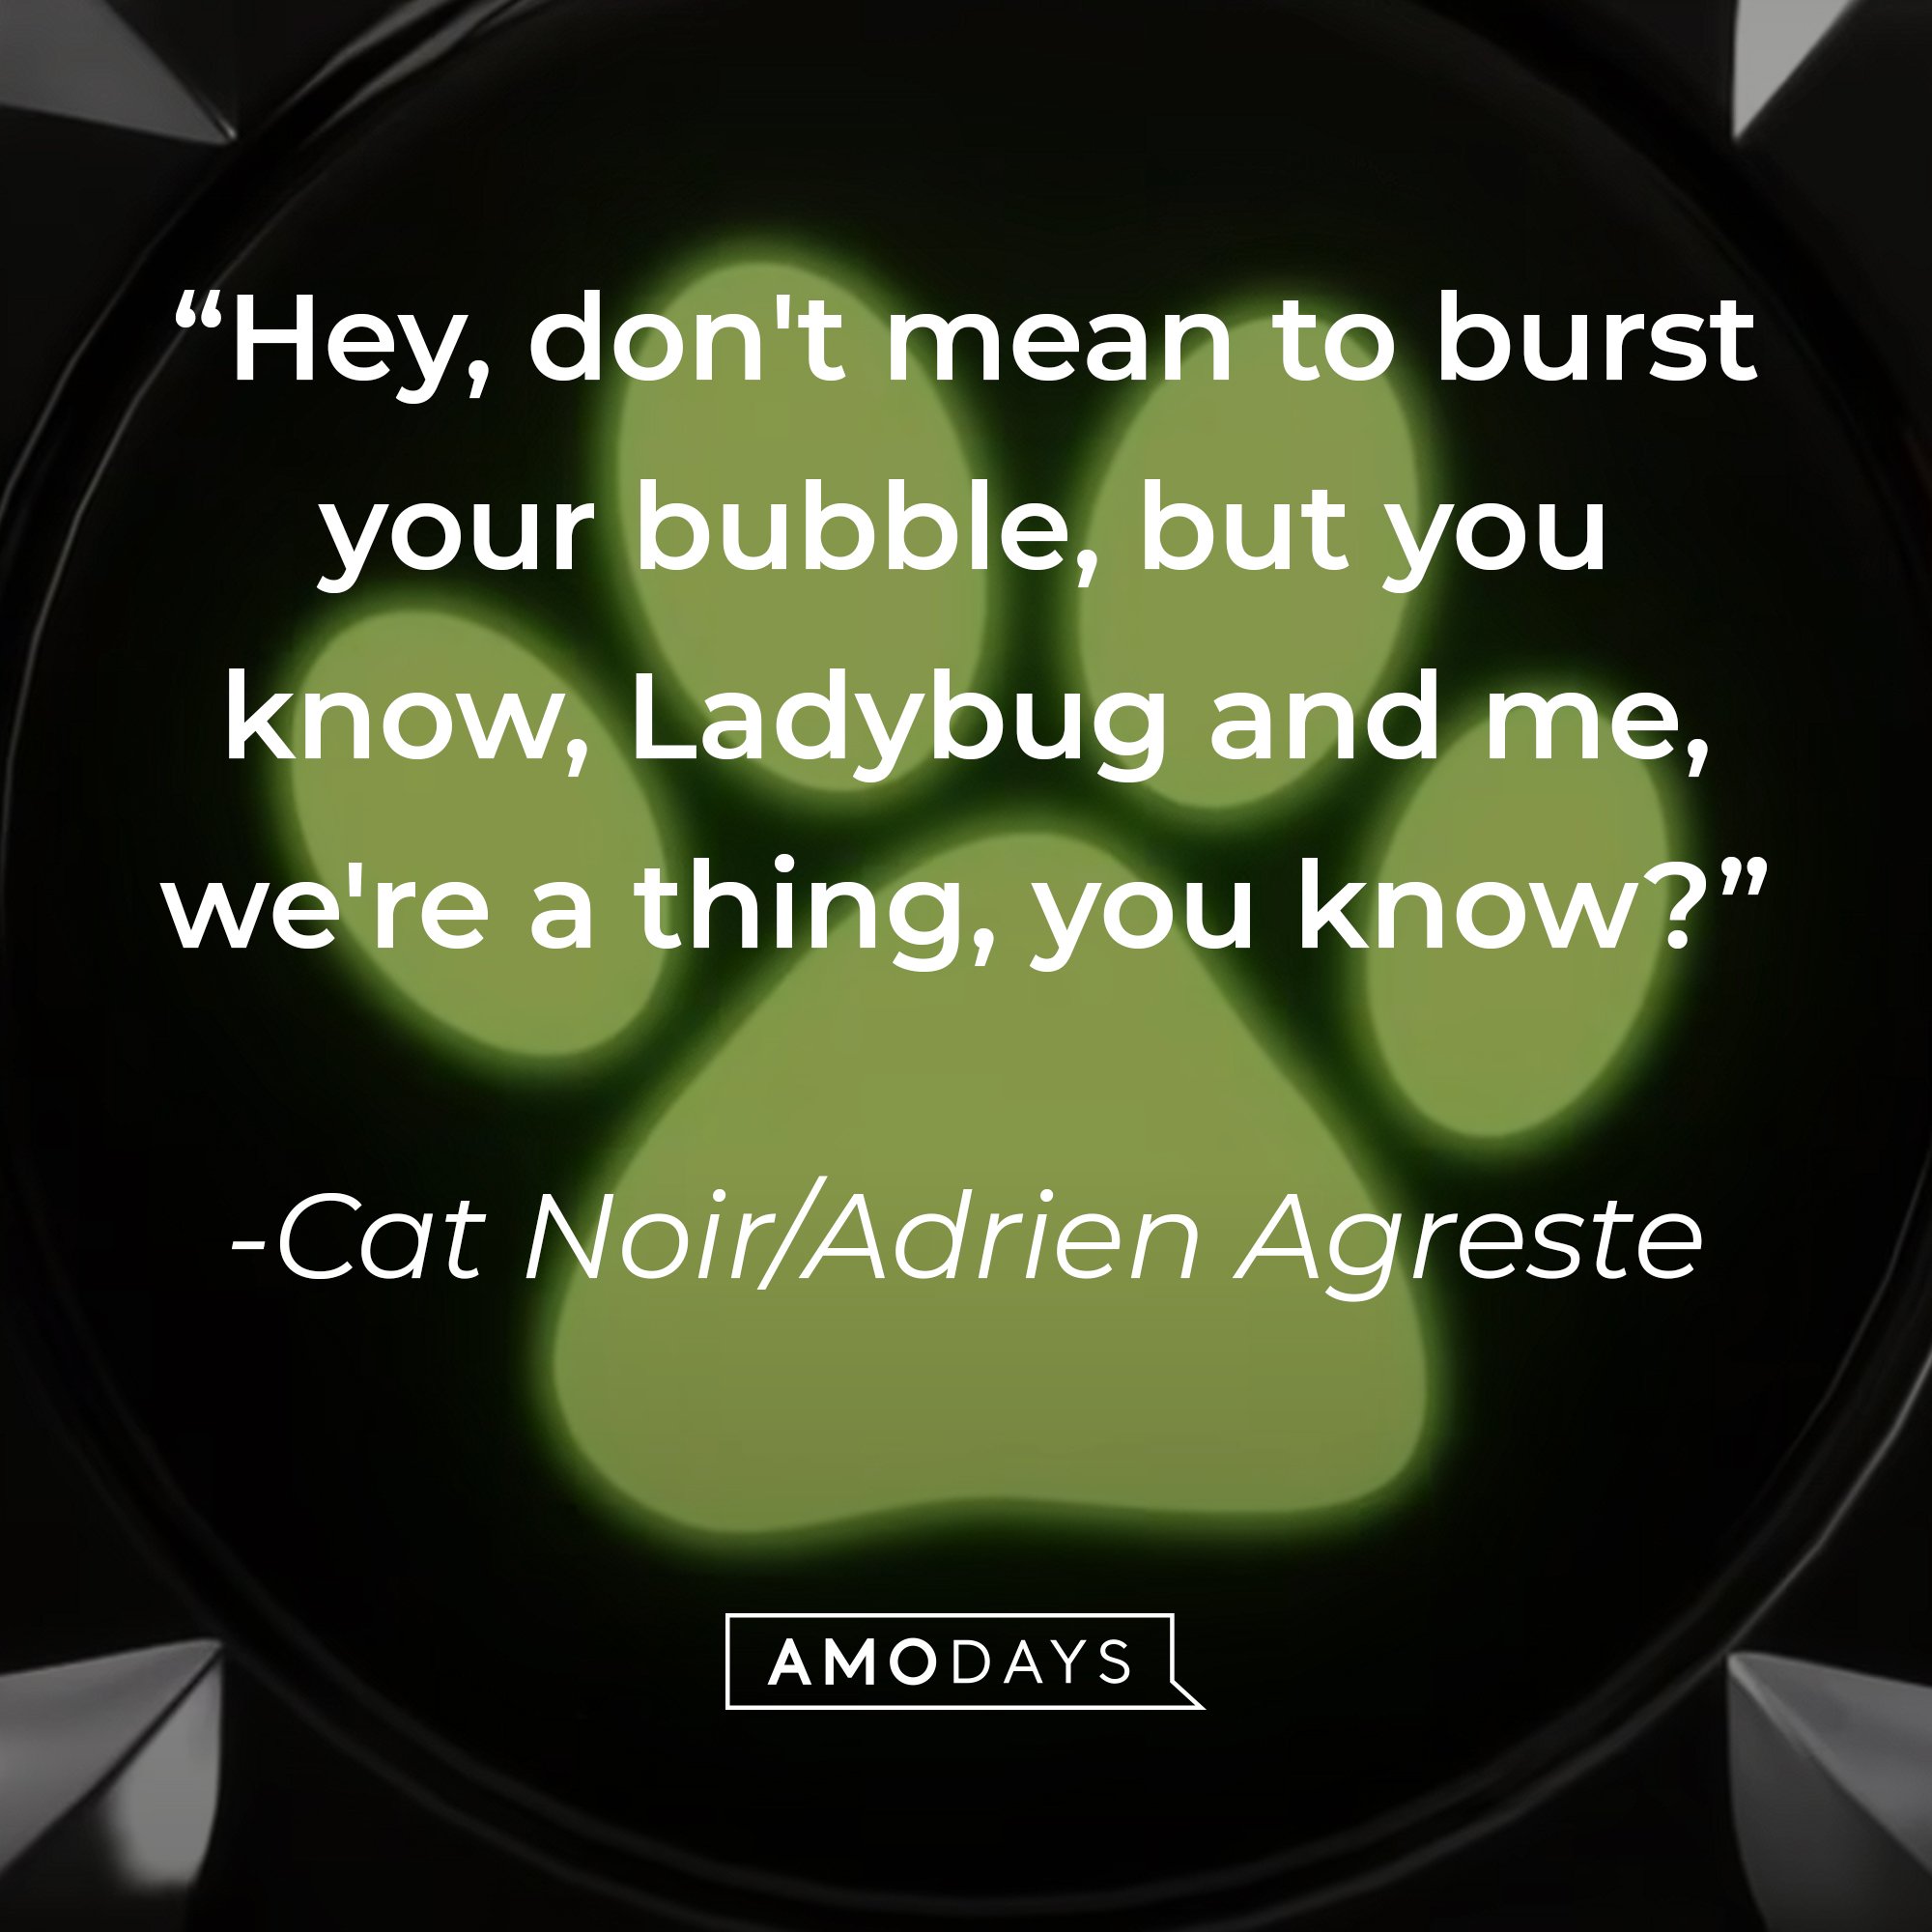 Cat Noir/Adrien Agreste’s quote: "Hey, don't mean to burst your bubble, but you know, Ladybug and me, we're a thing, you know?" | Image: AmoDays 